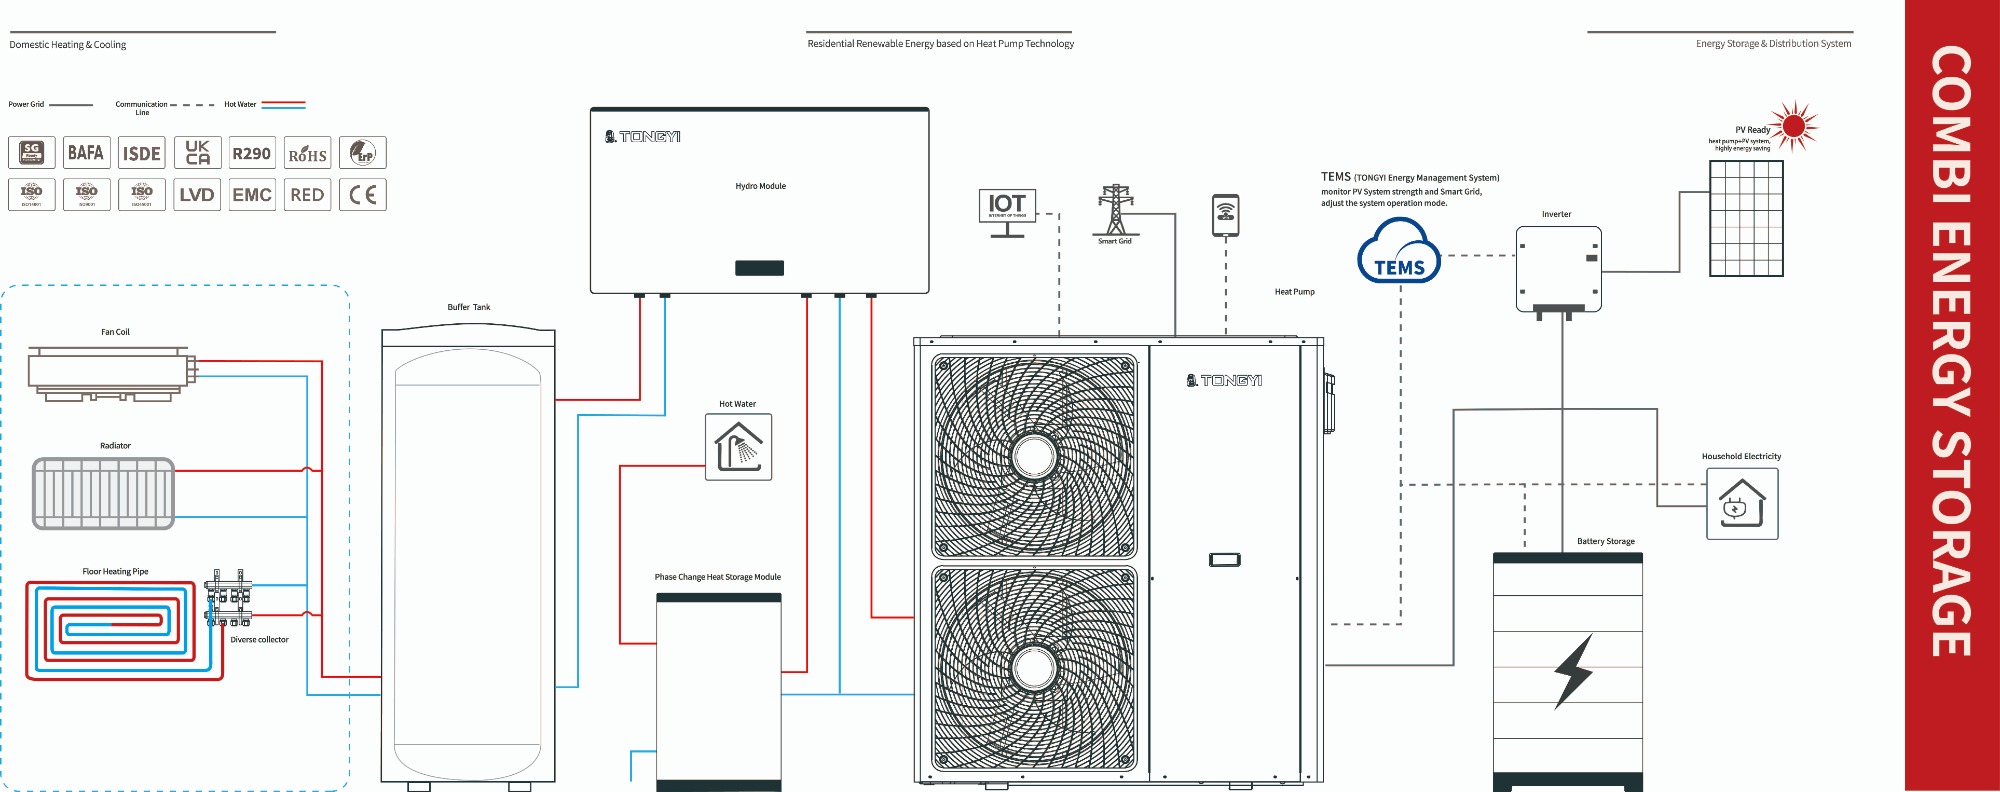 Heat Pump Home System: An Innovative Approach to Energy Management